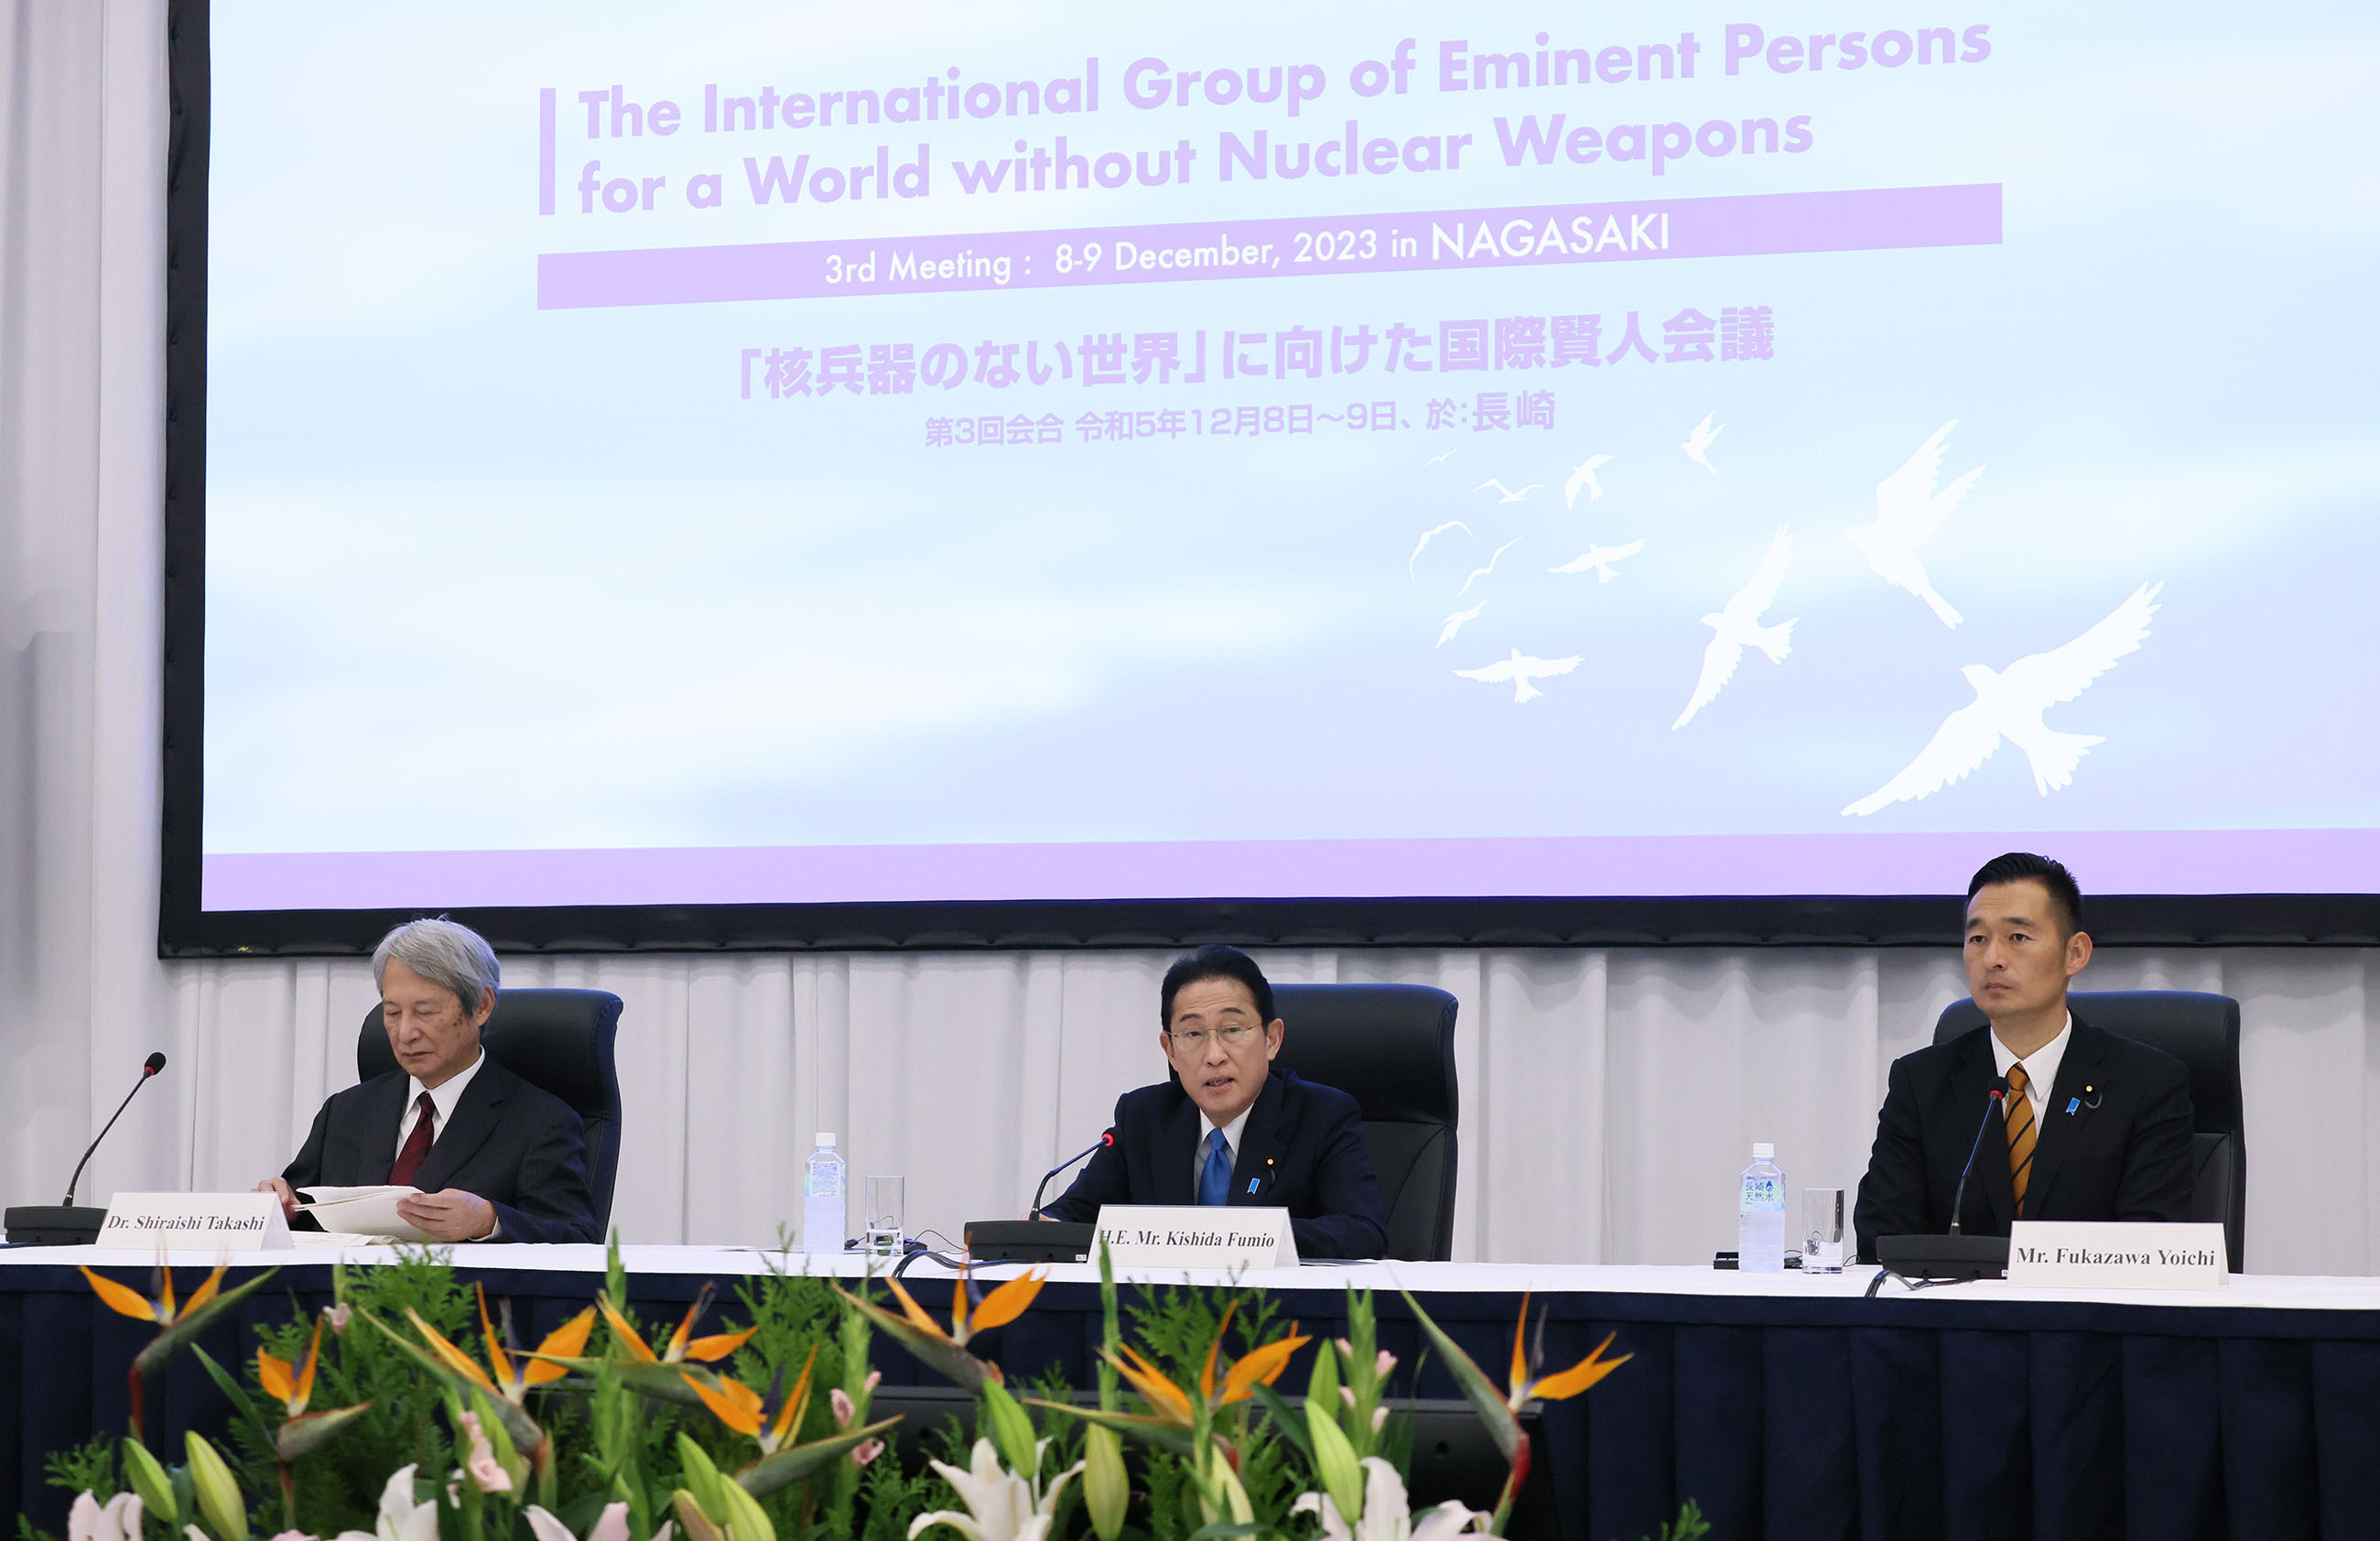 Meeting of the International Group of Eminent Persons for a World without Nuclear Weapons (IGEP)